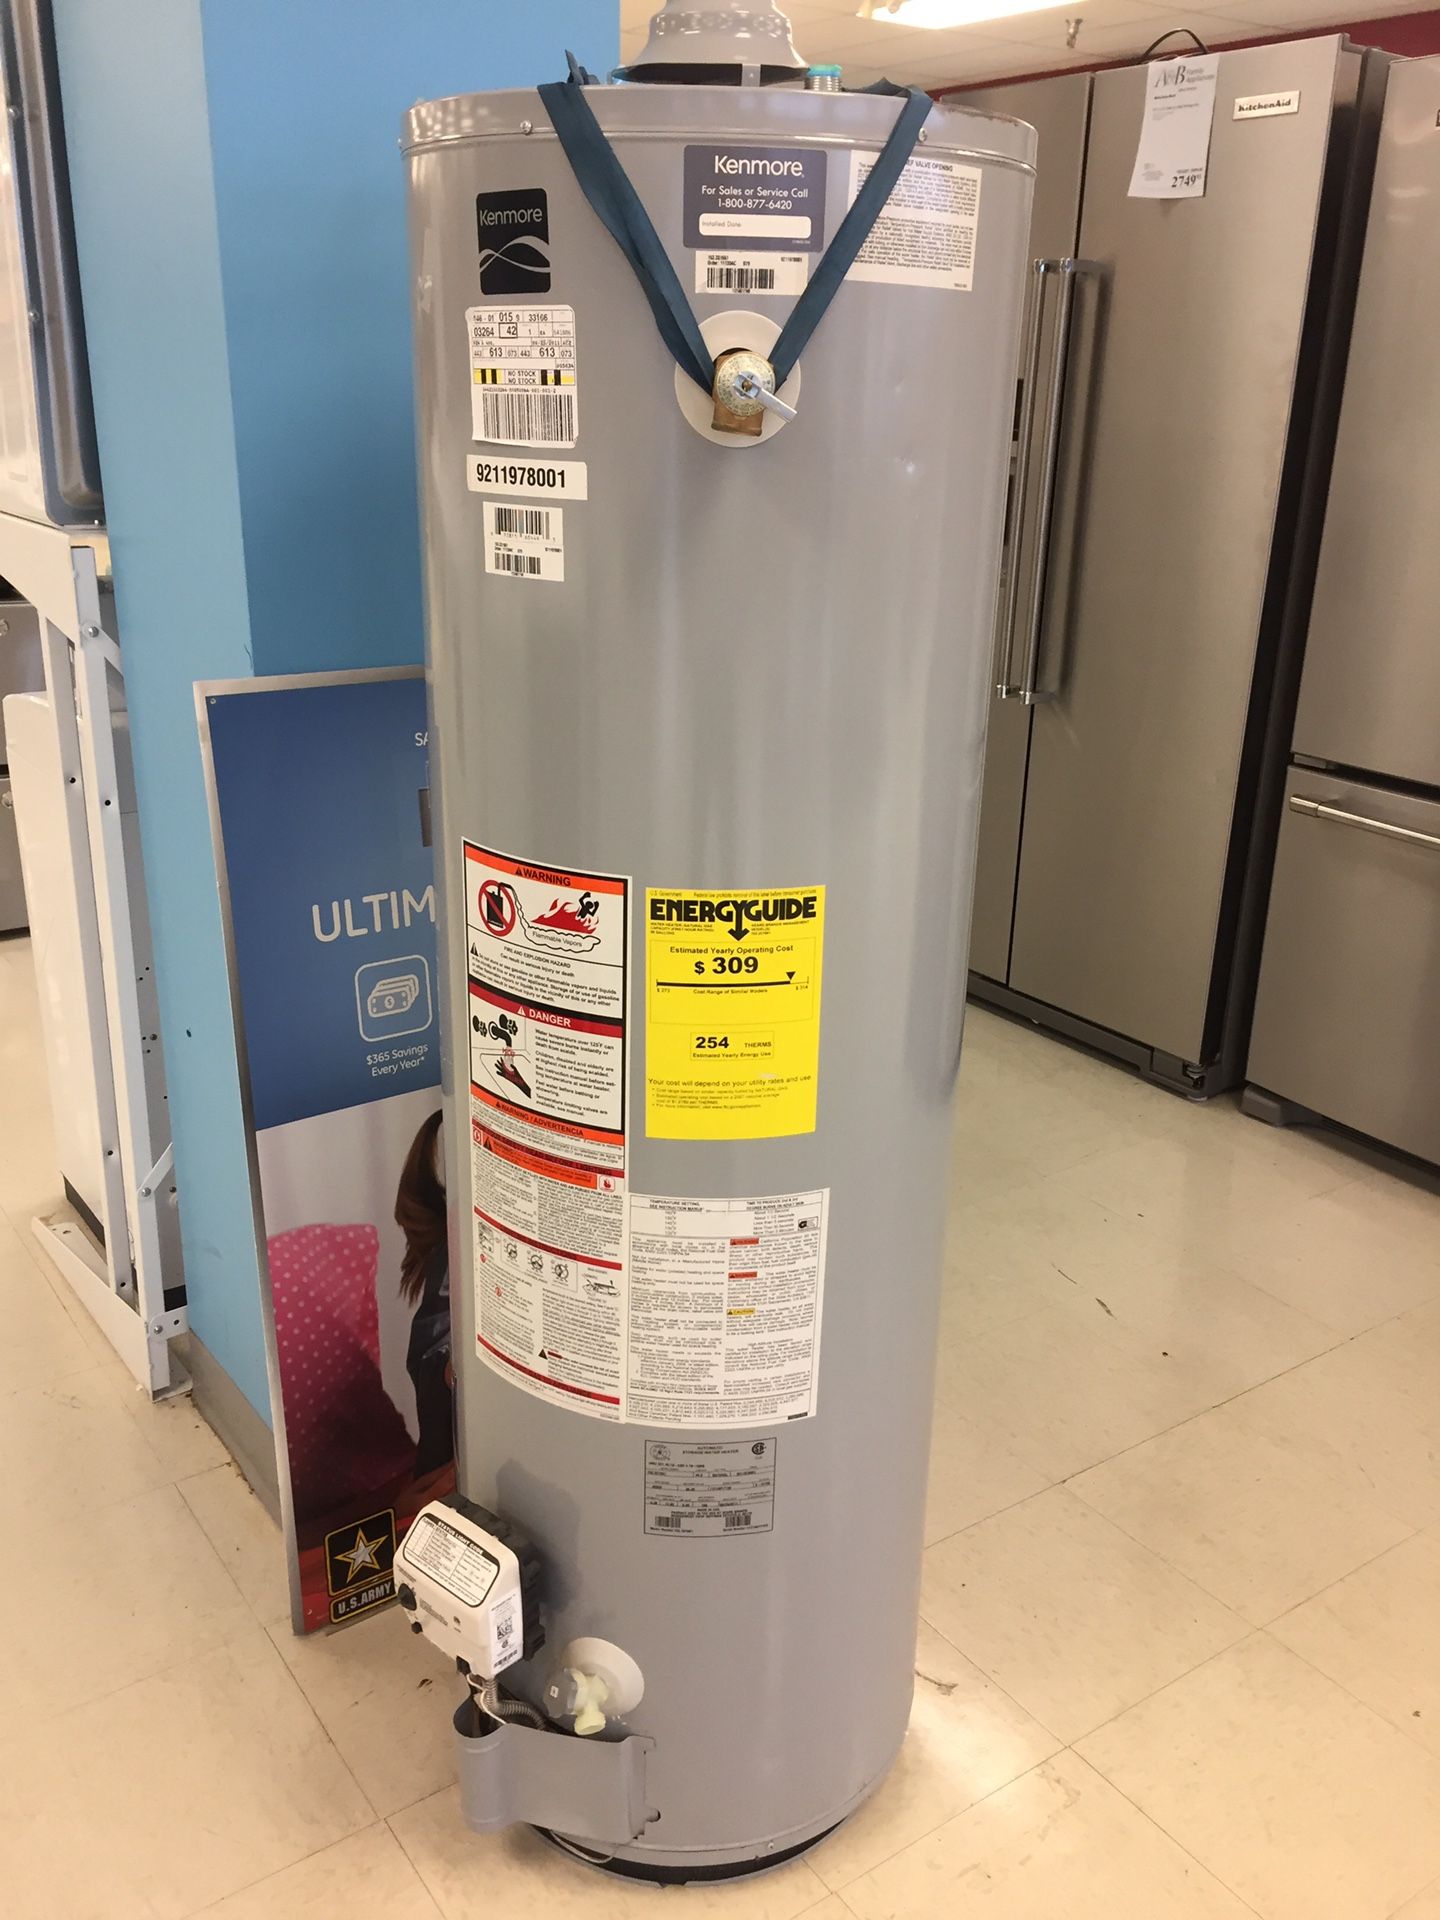 Brand new Kenmore 40 Gallon Gas hot water heater